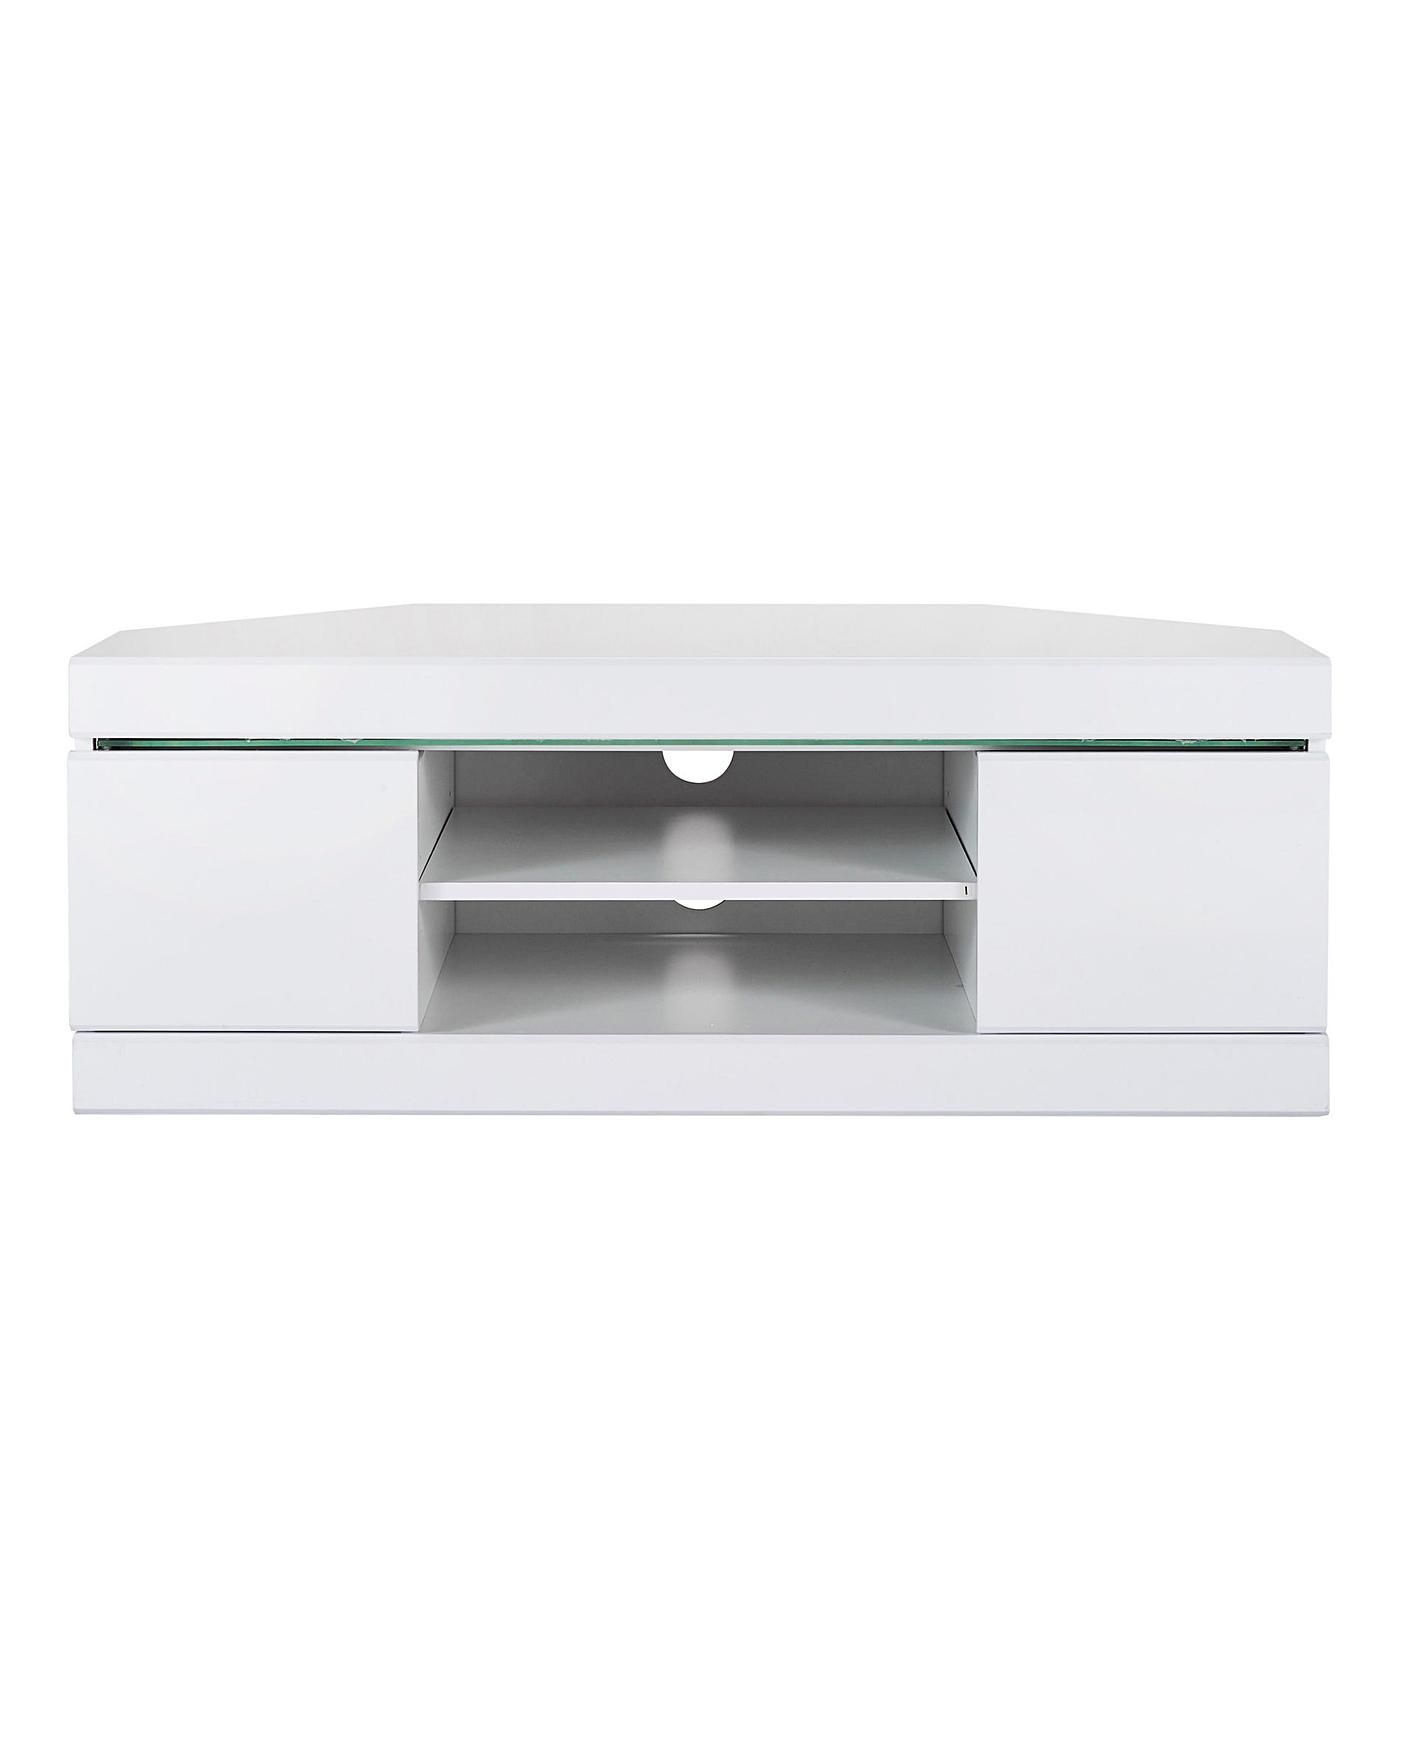 White High Gloss Corner Tv Cabinet • Patio Ideas With Gloss Corner Tv Unit (View 5 of 15)